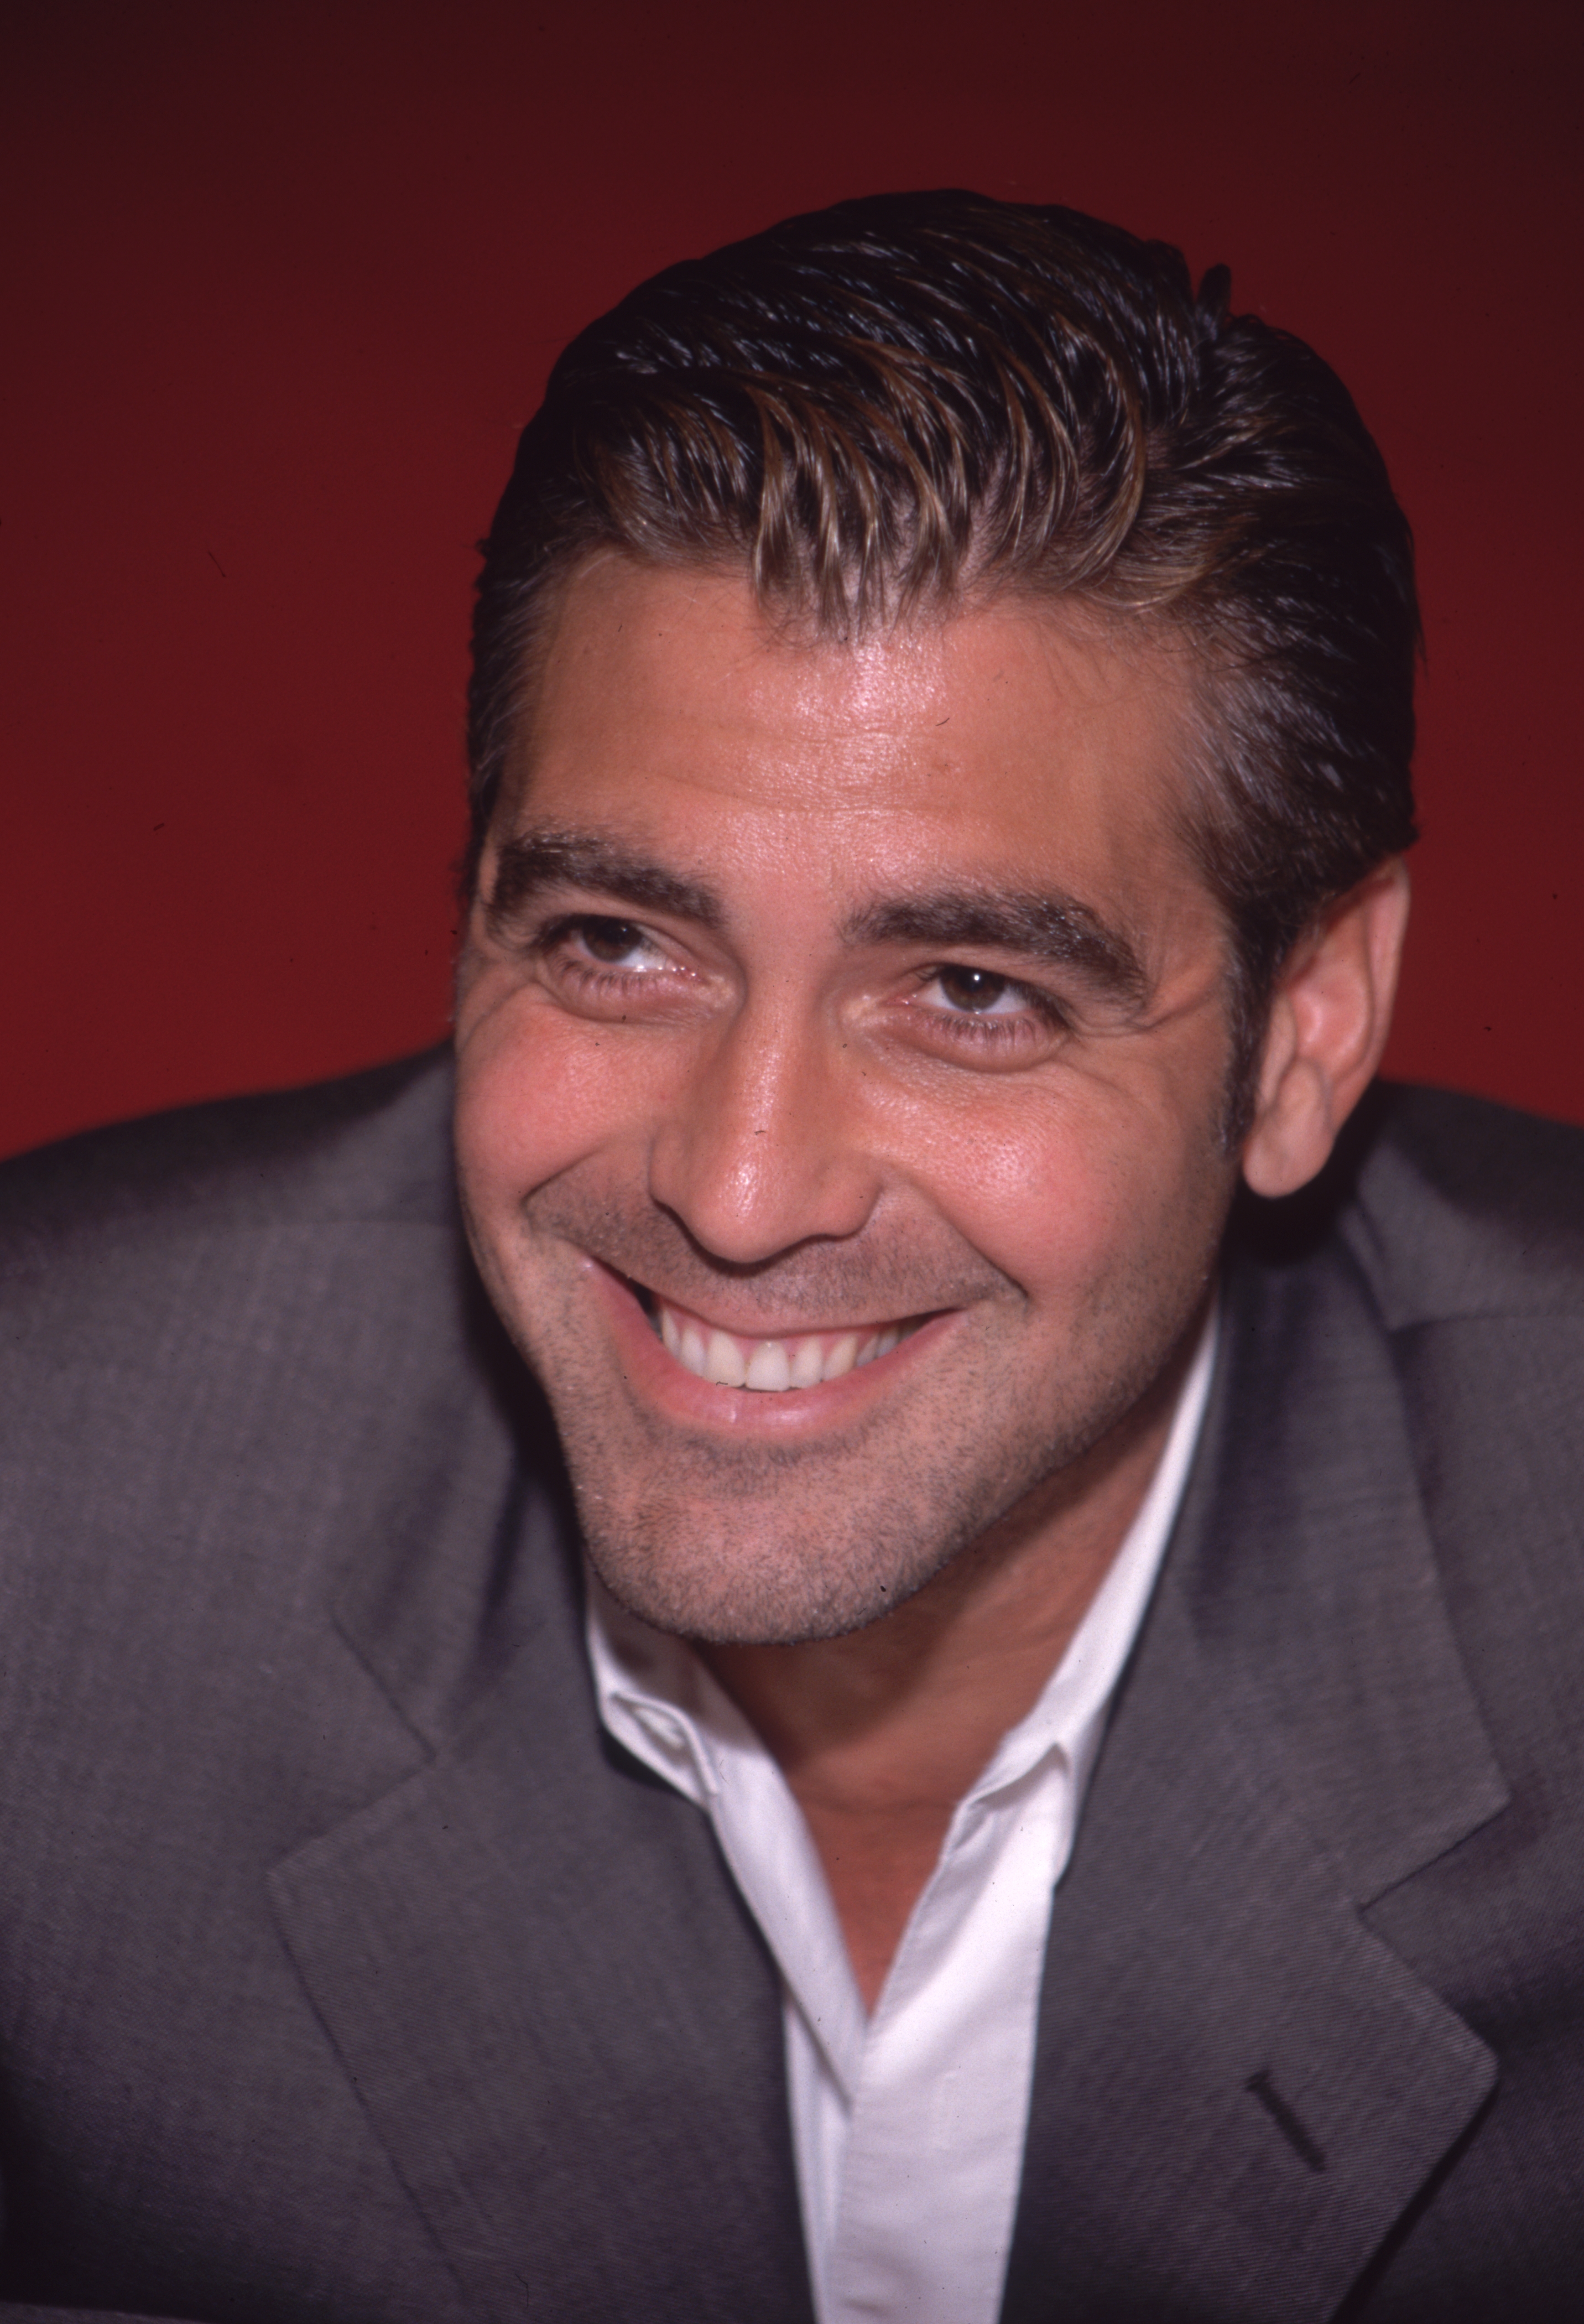 A studio headshot captured actor George Clooney with a beaming smile on June 9, 1998. | Source: Getty Images